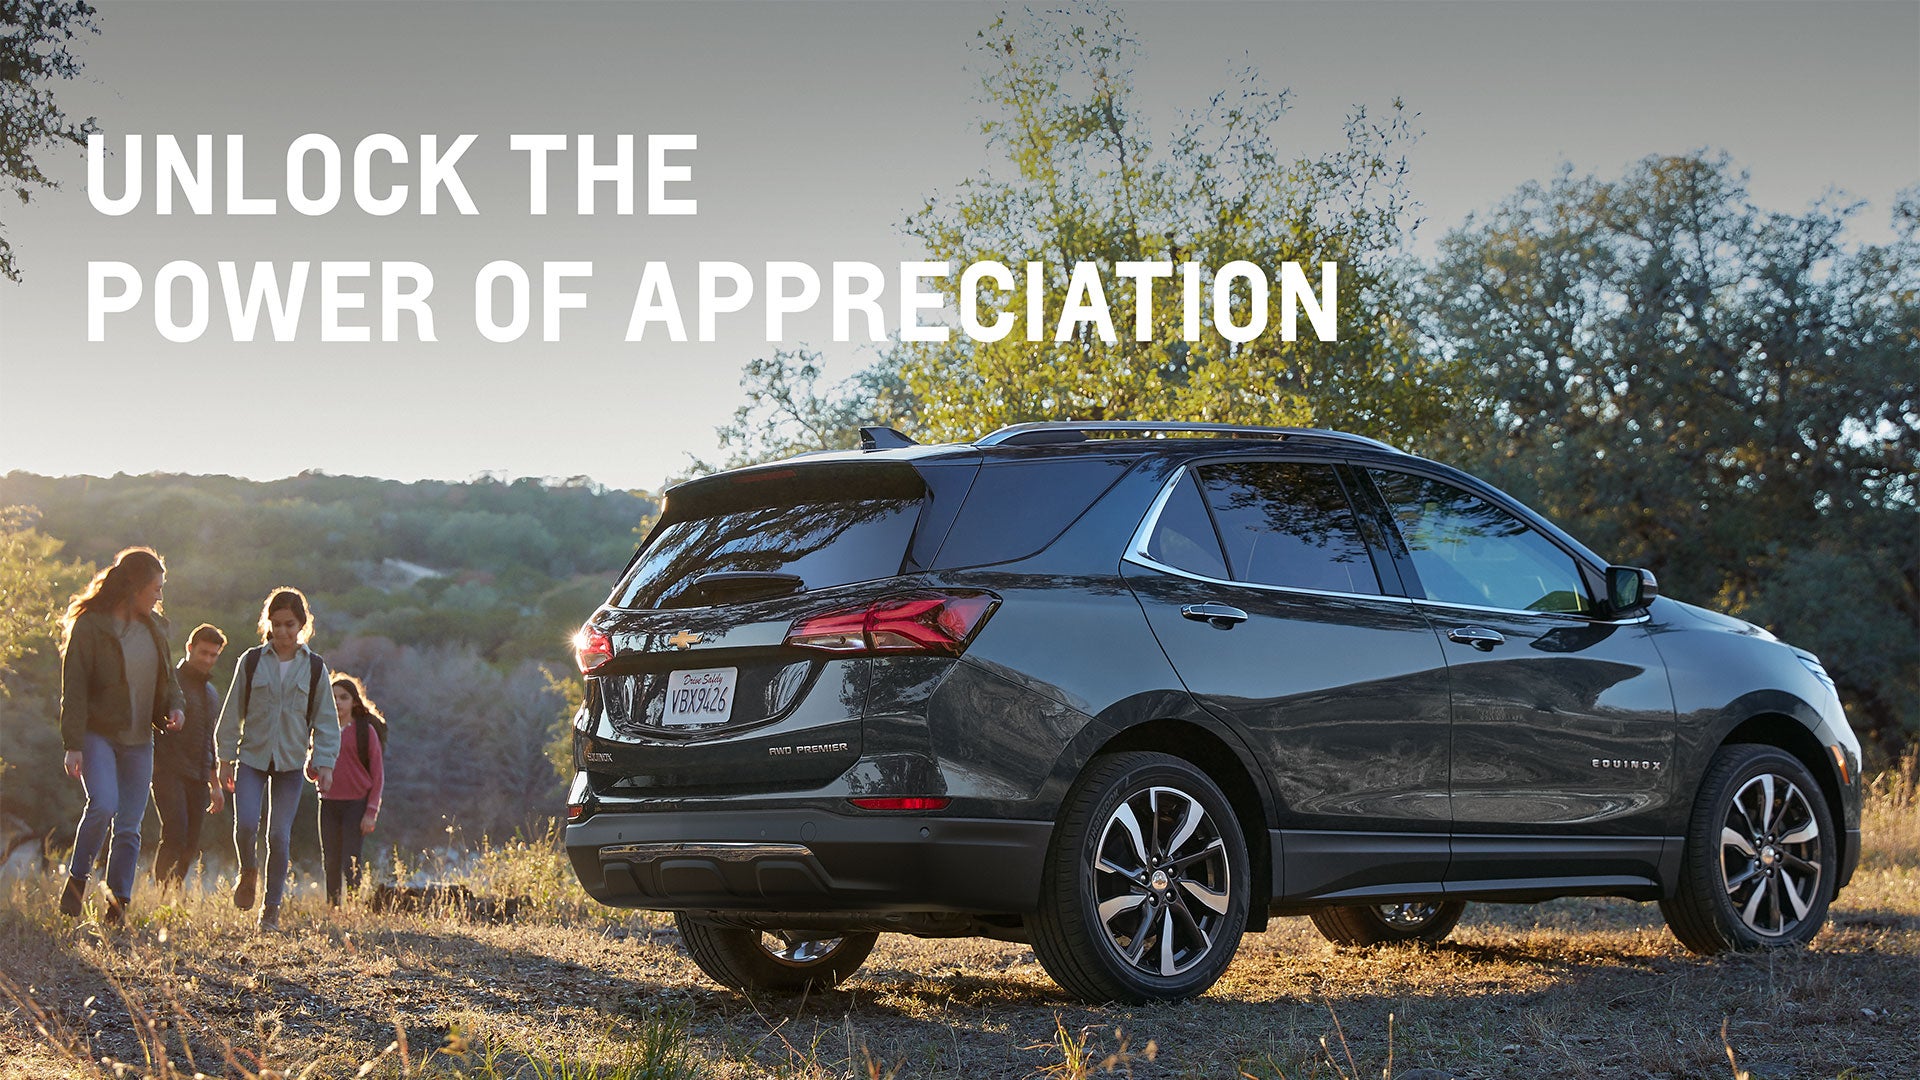 Unlock the power of appreciation | Mountain View Chevrolet in UPLAND CA